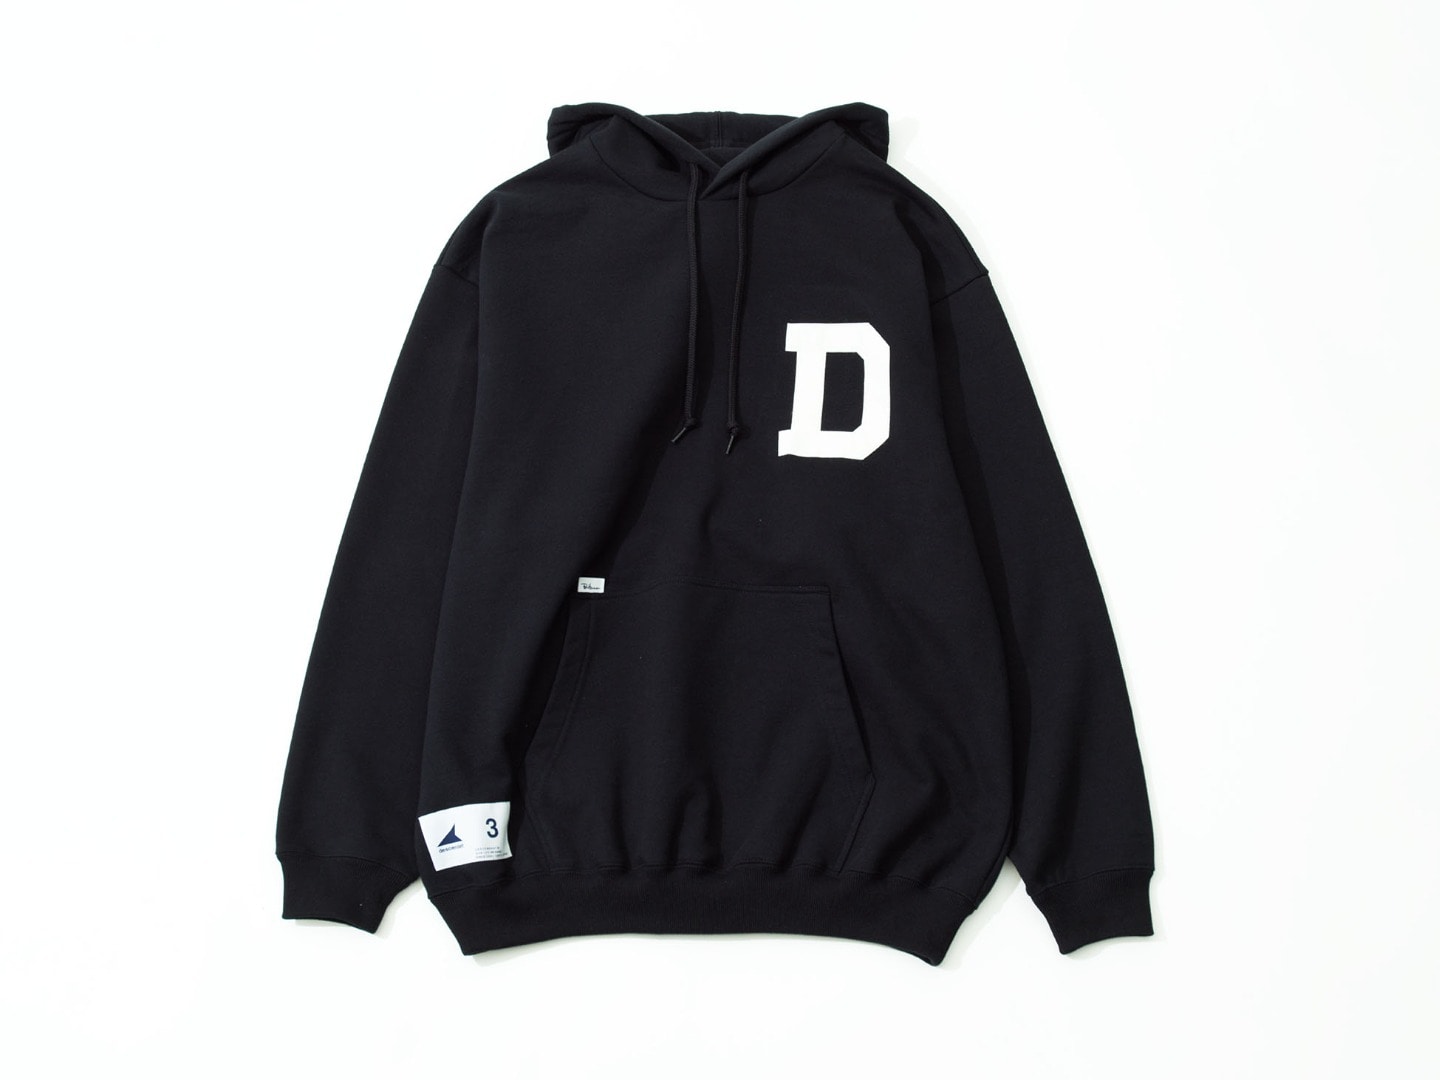 DESCENDANT Sweat Hoodie ディセンダント ロンハーマン